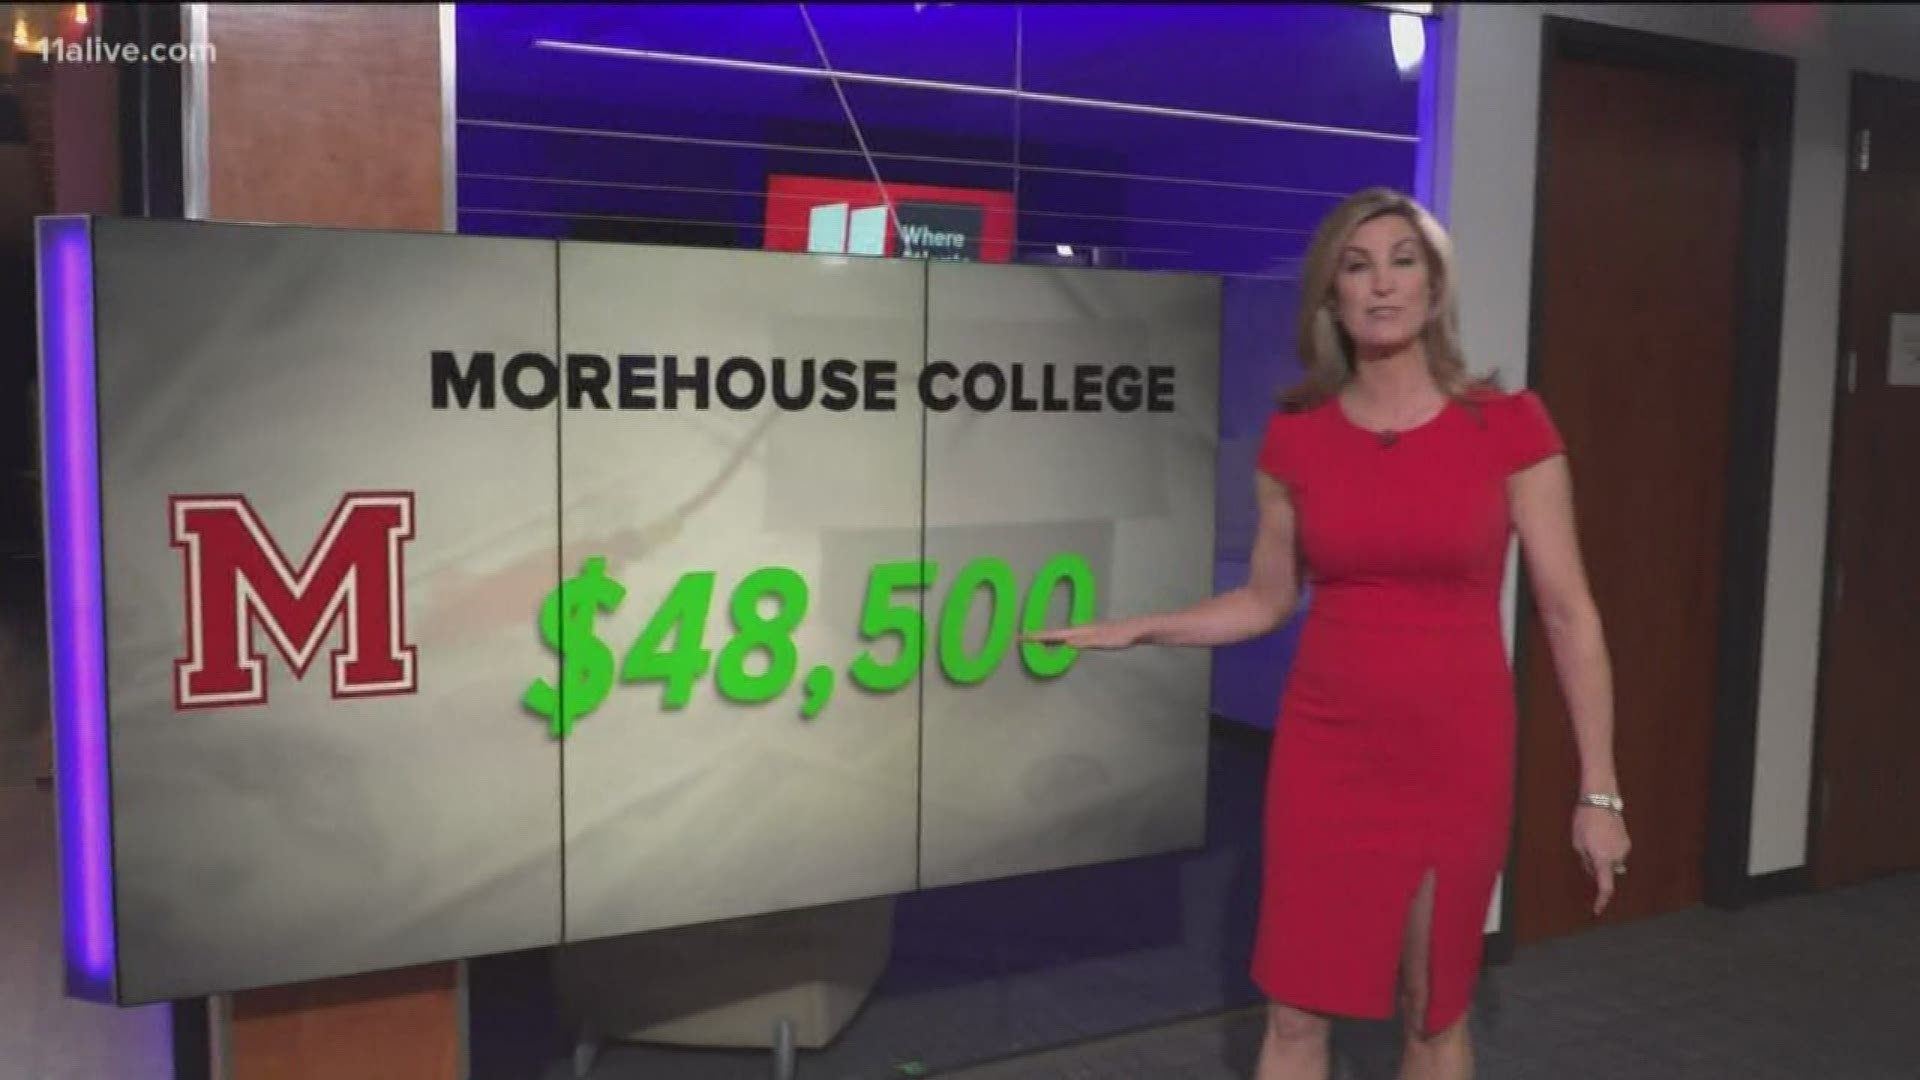 The cost is compared to other colleges in Georgia.